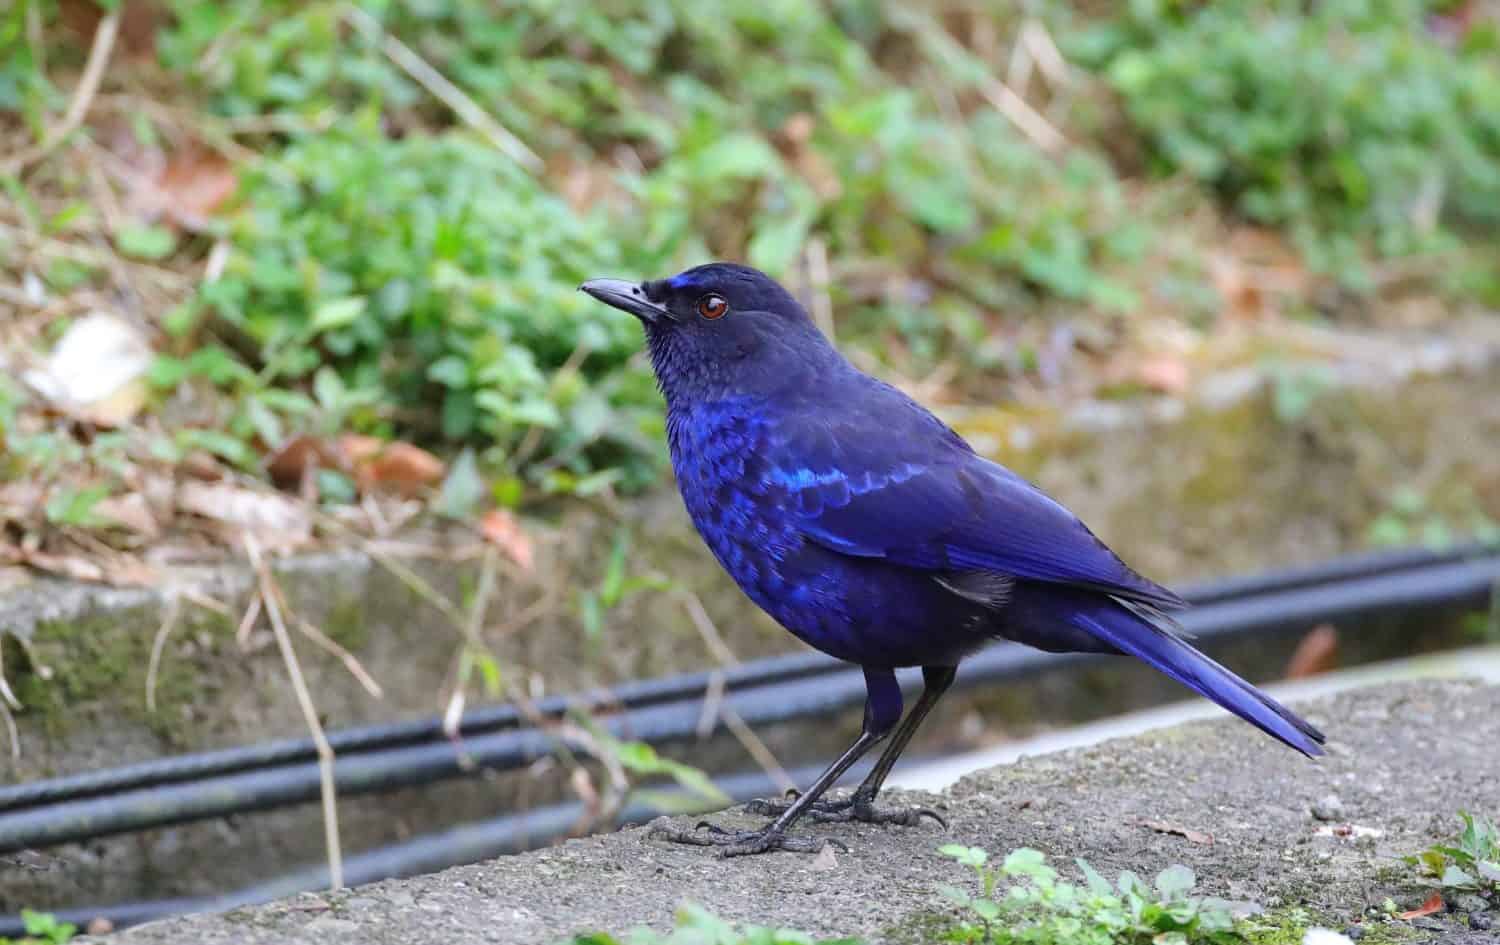 The Taiwan whistling thrush (Myophonus insularis), also known as the Formosan whistling thrush, is a species of bird in the family Muscicapidae. It is endemic to Taiwan.